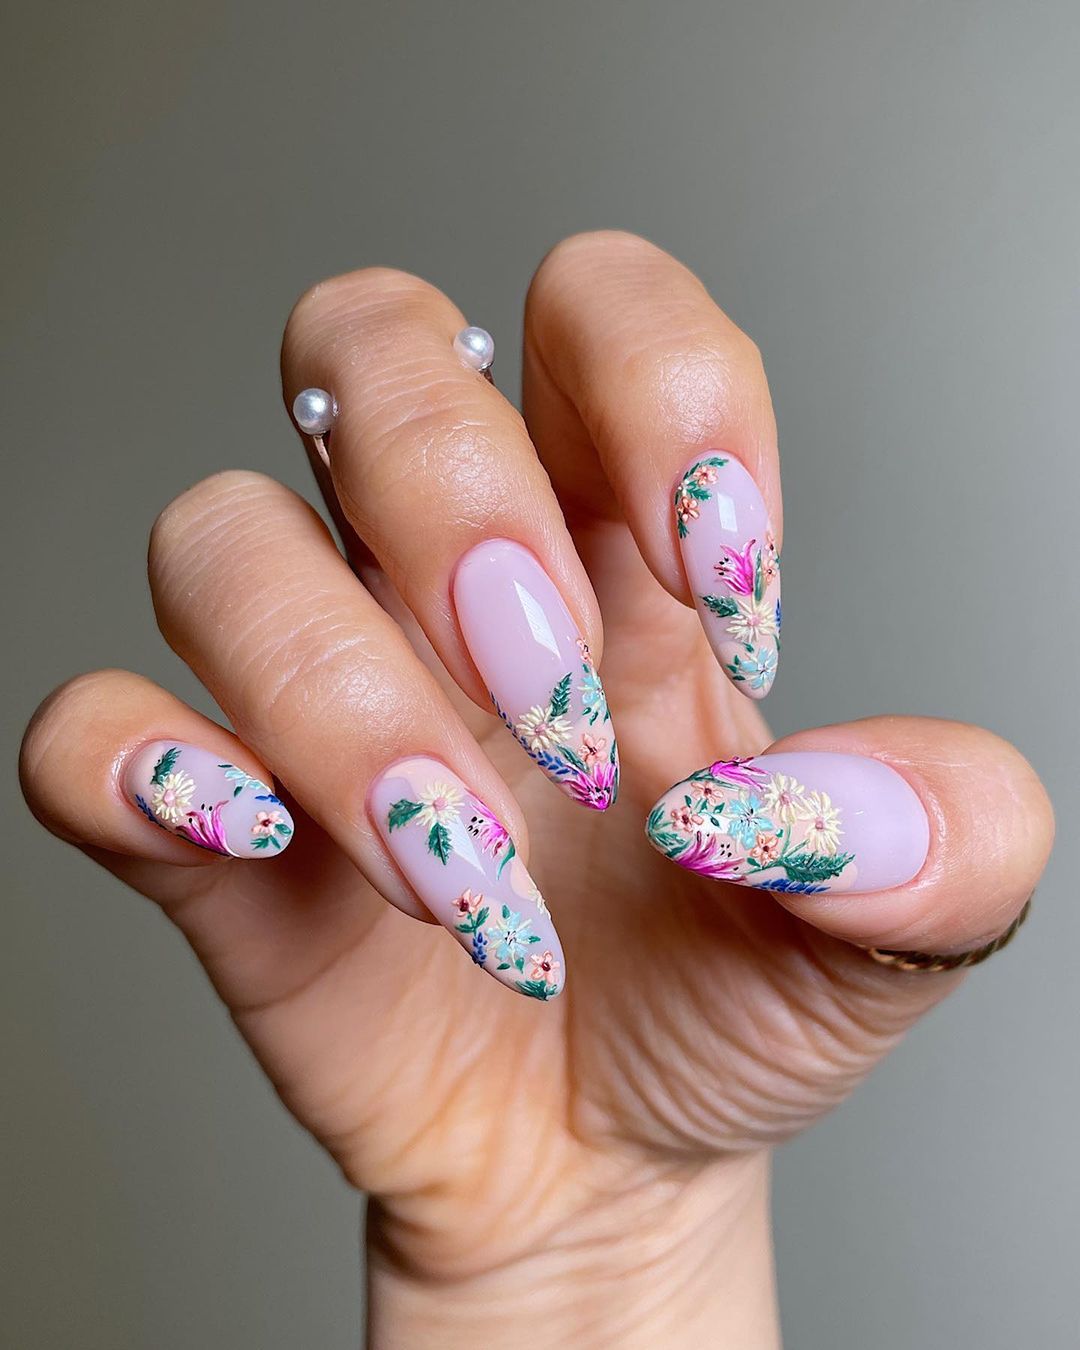 Spring Almond Nails with Floral Tip Design